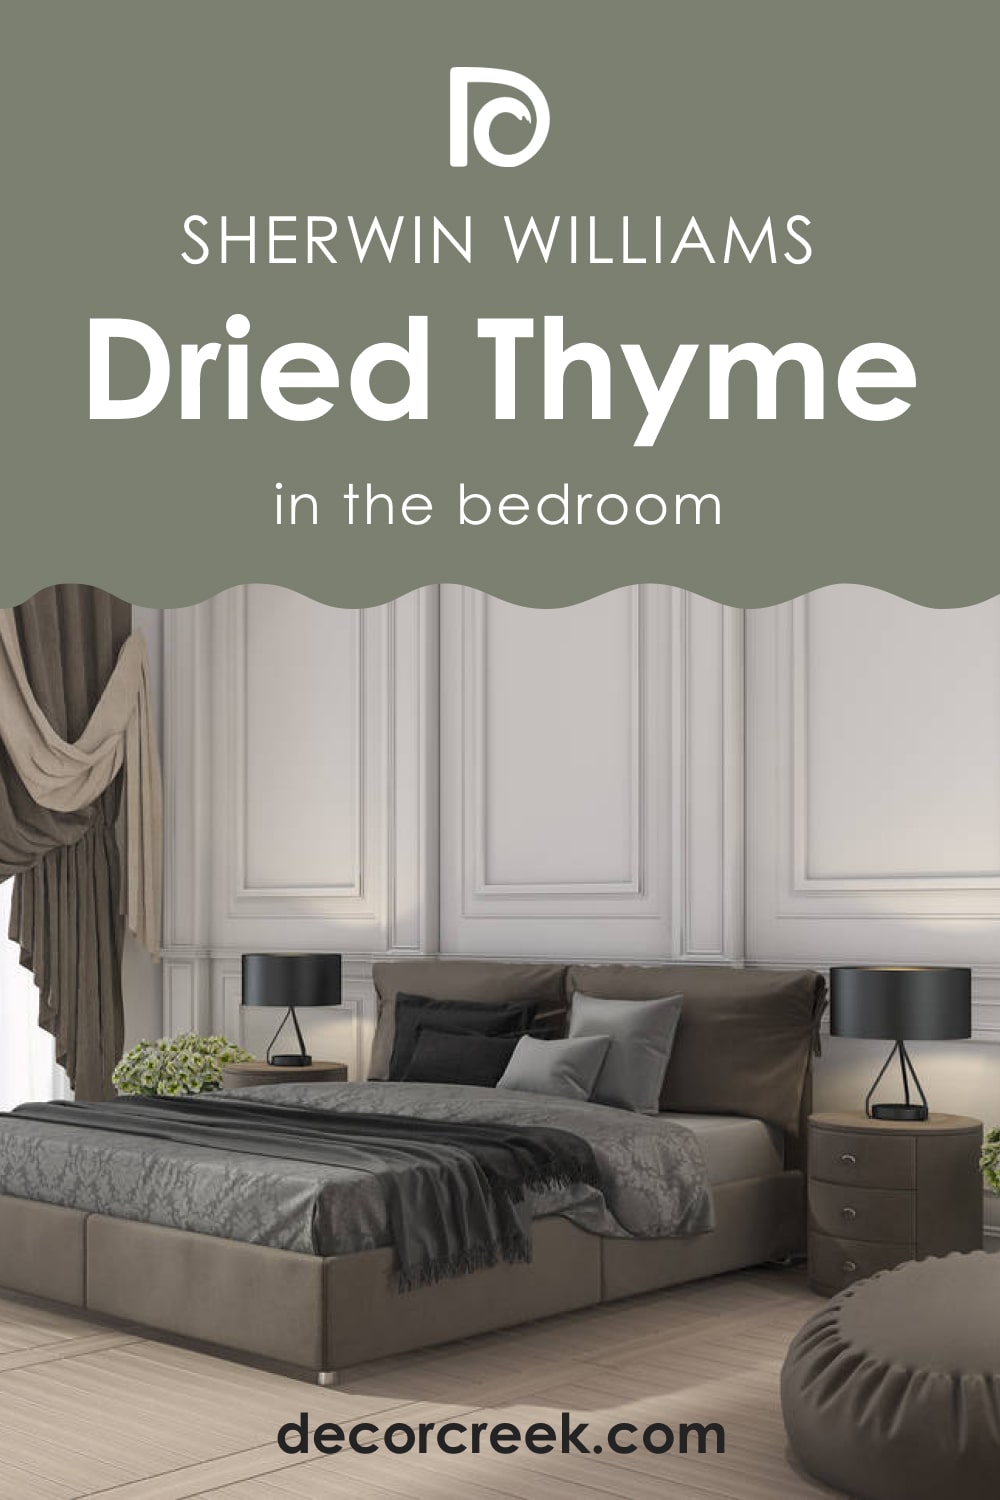 Dried Thyme SW-6186 in the Bedroom